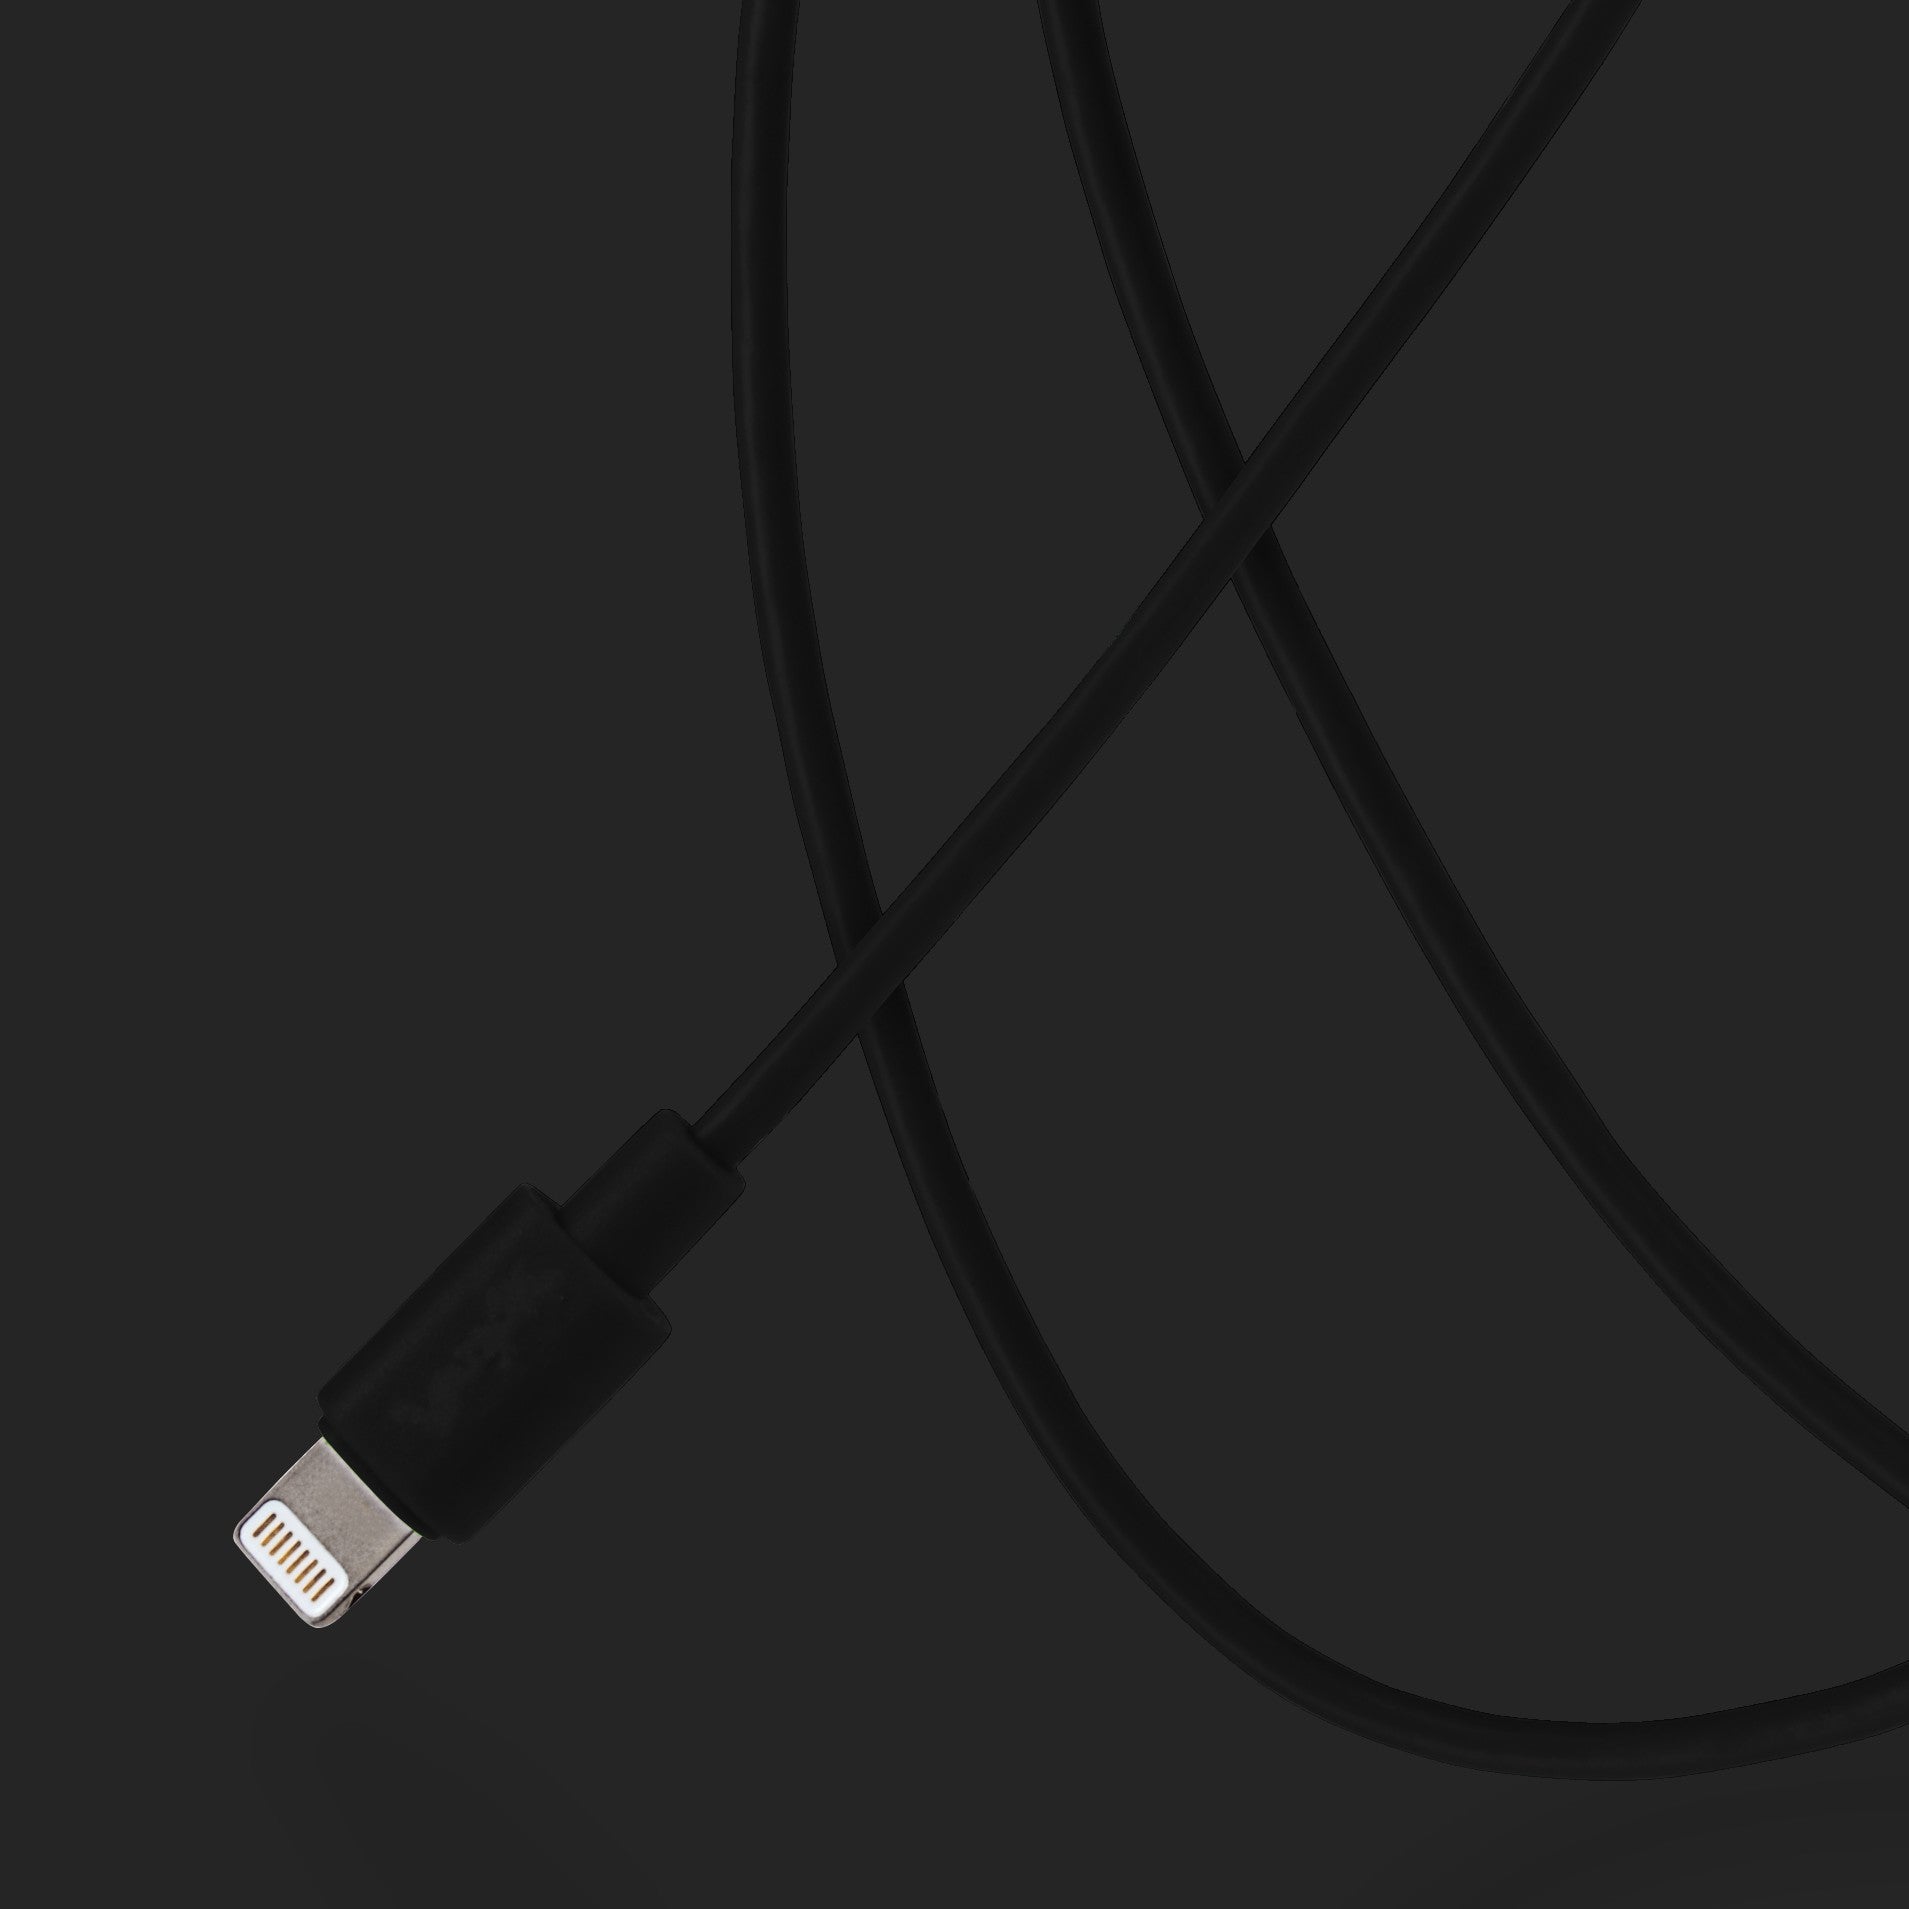 Maplin Lightning to USB-A Cable - Black, 0.5m, Cables, Maplin